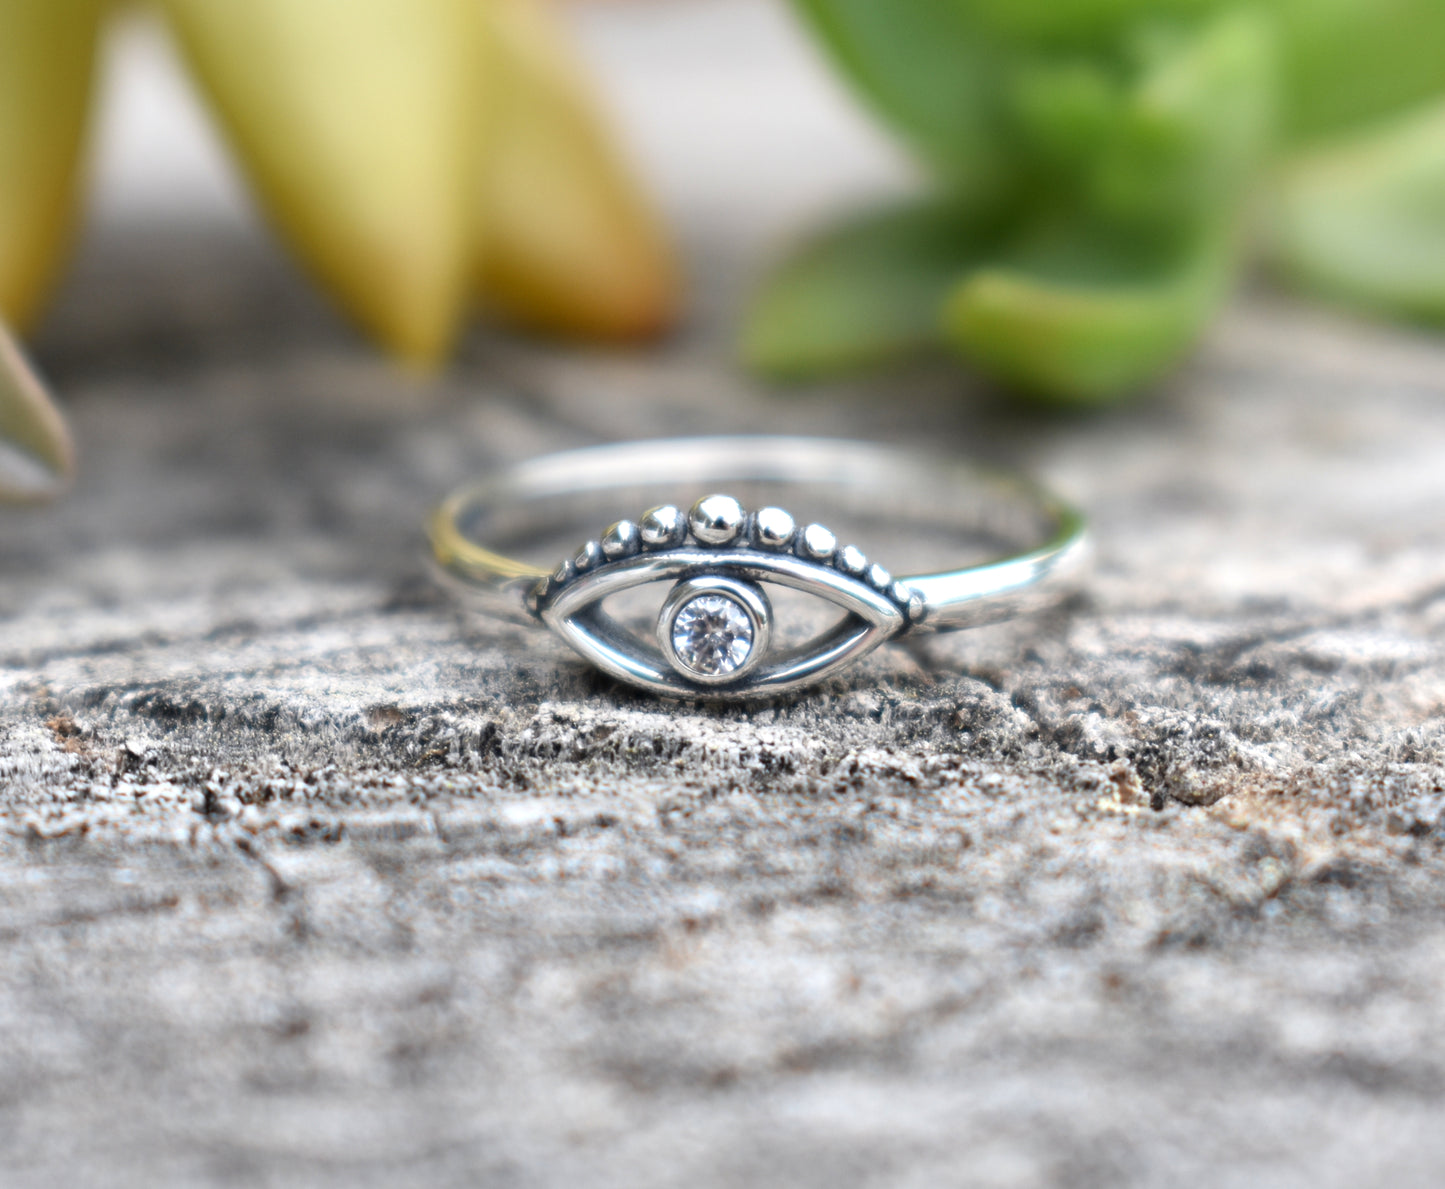 Evil Eye Ring- Silver Eye Ring, Witchy Jewelry, Boho Ring-Sterling Silver Ring